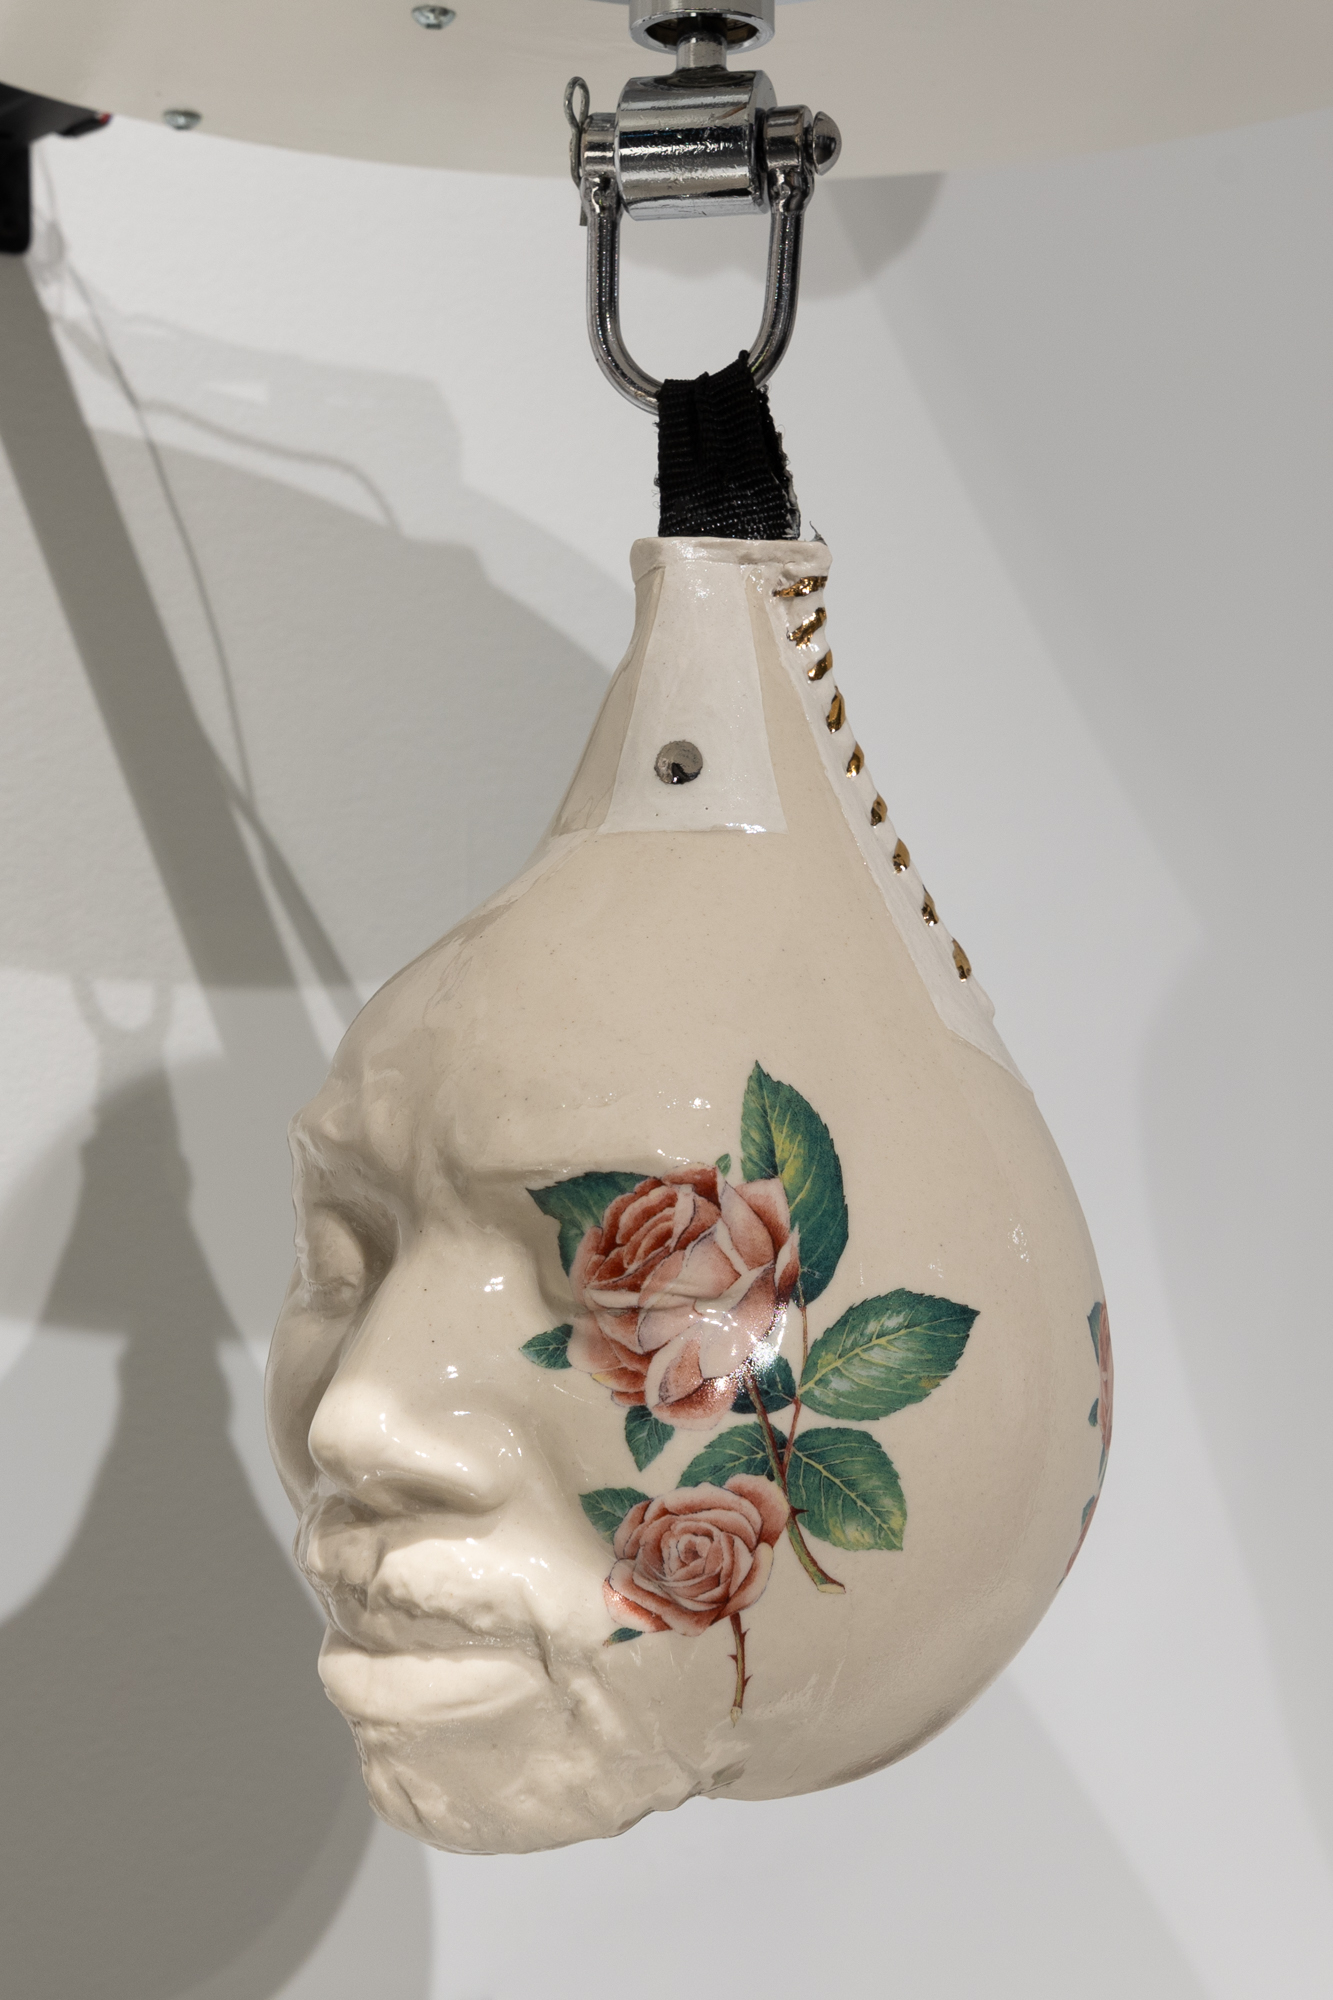 A face embedded on a ceramic punching bag with golden stitching on the side and a rose motif on the right side of the face. 